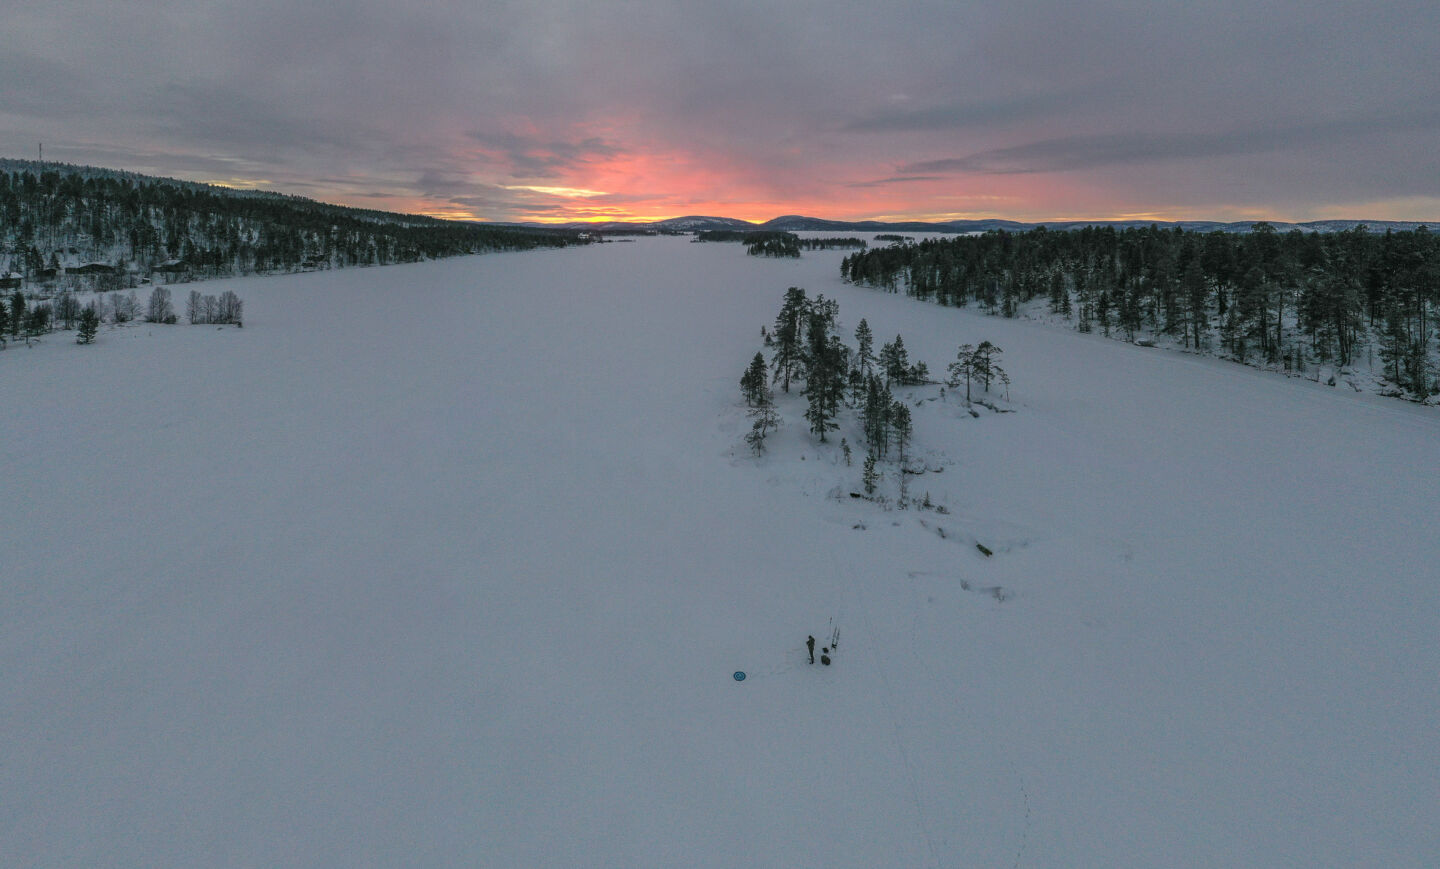 Dramatic sunset over the frozen winter lake in Inari, a film location in Finnish Lapland